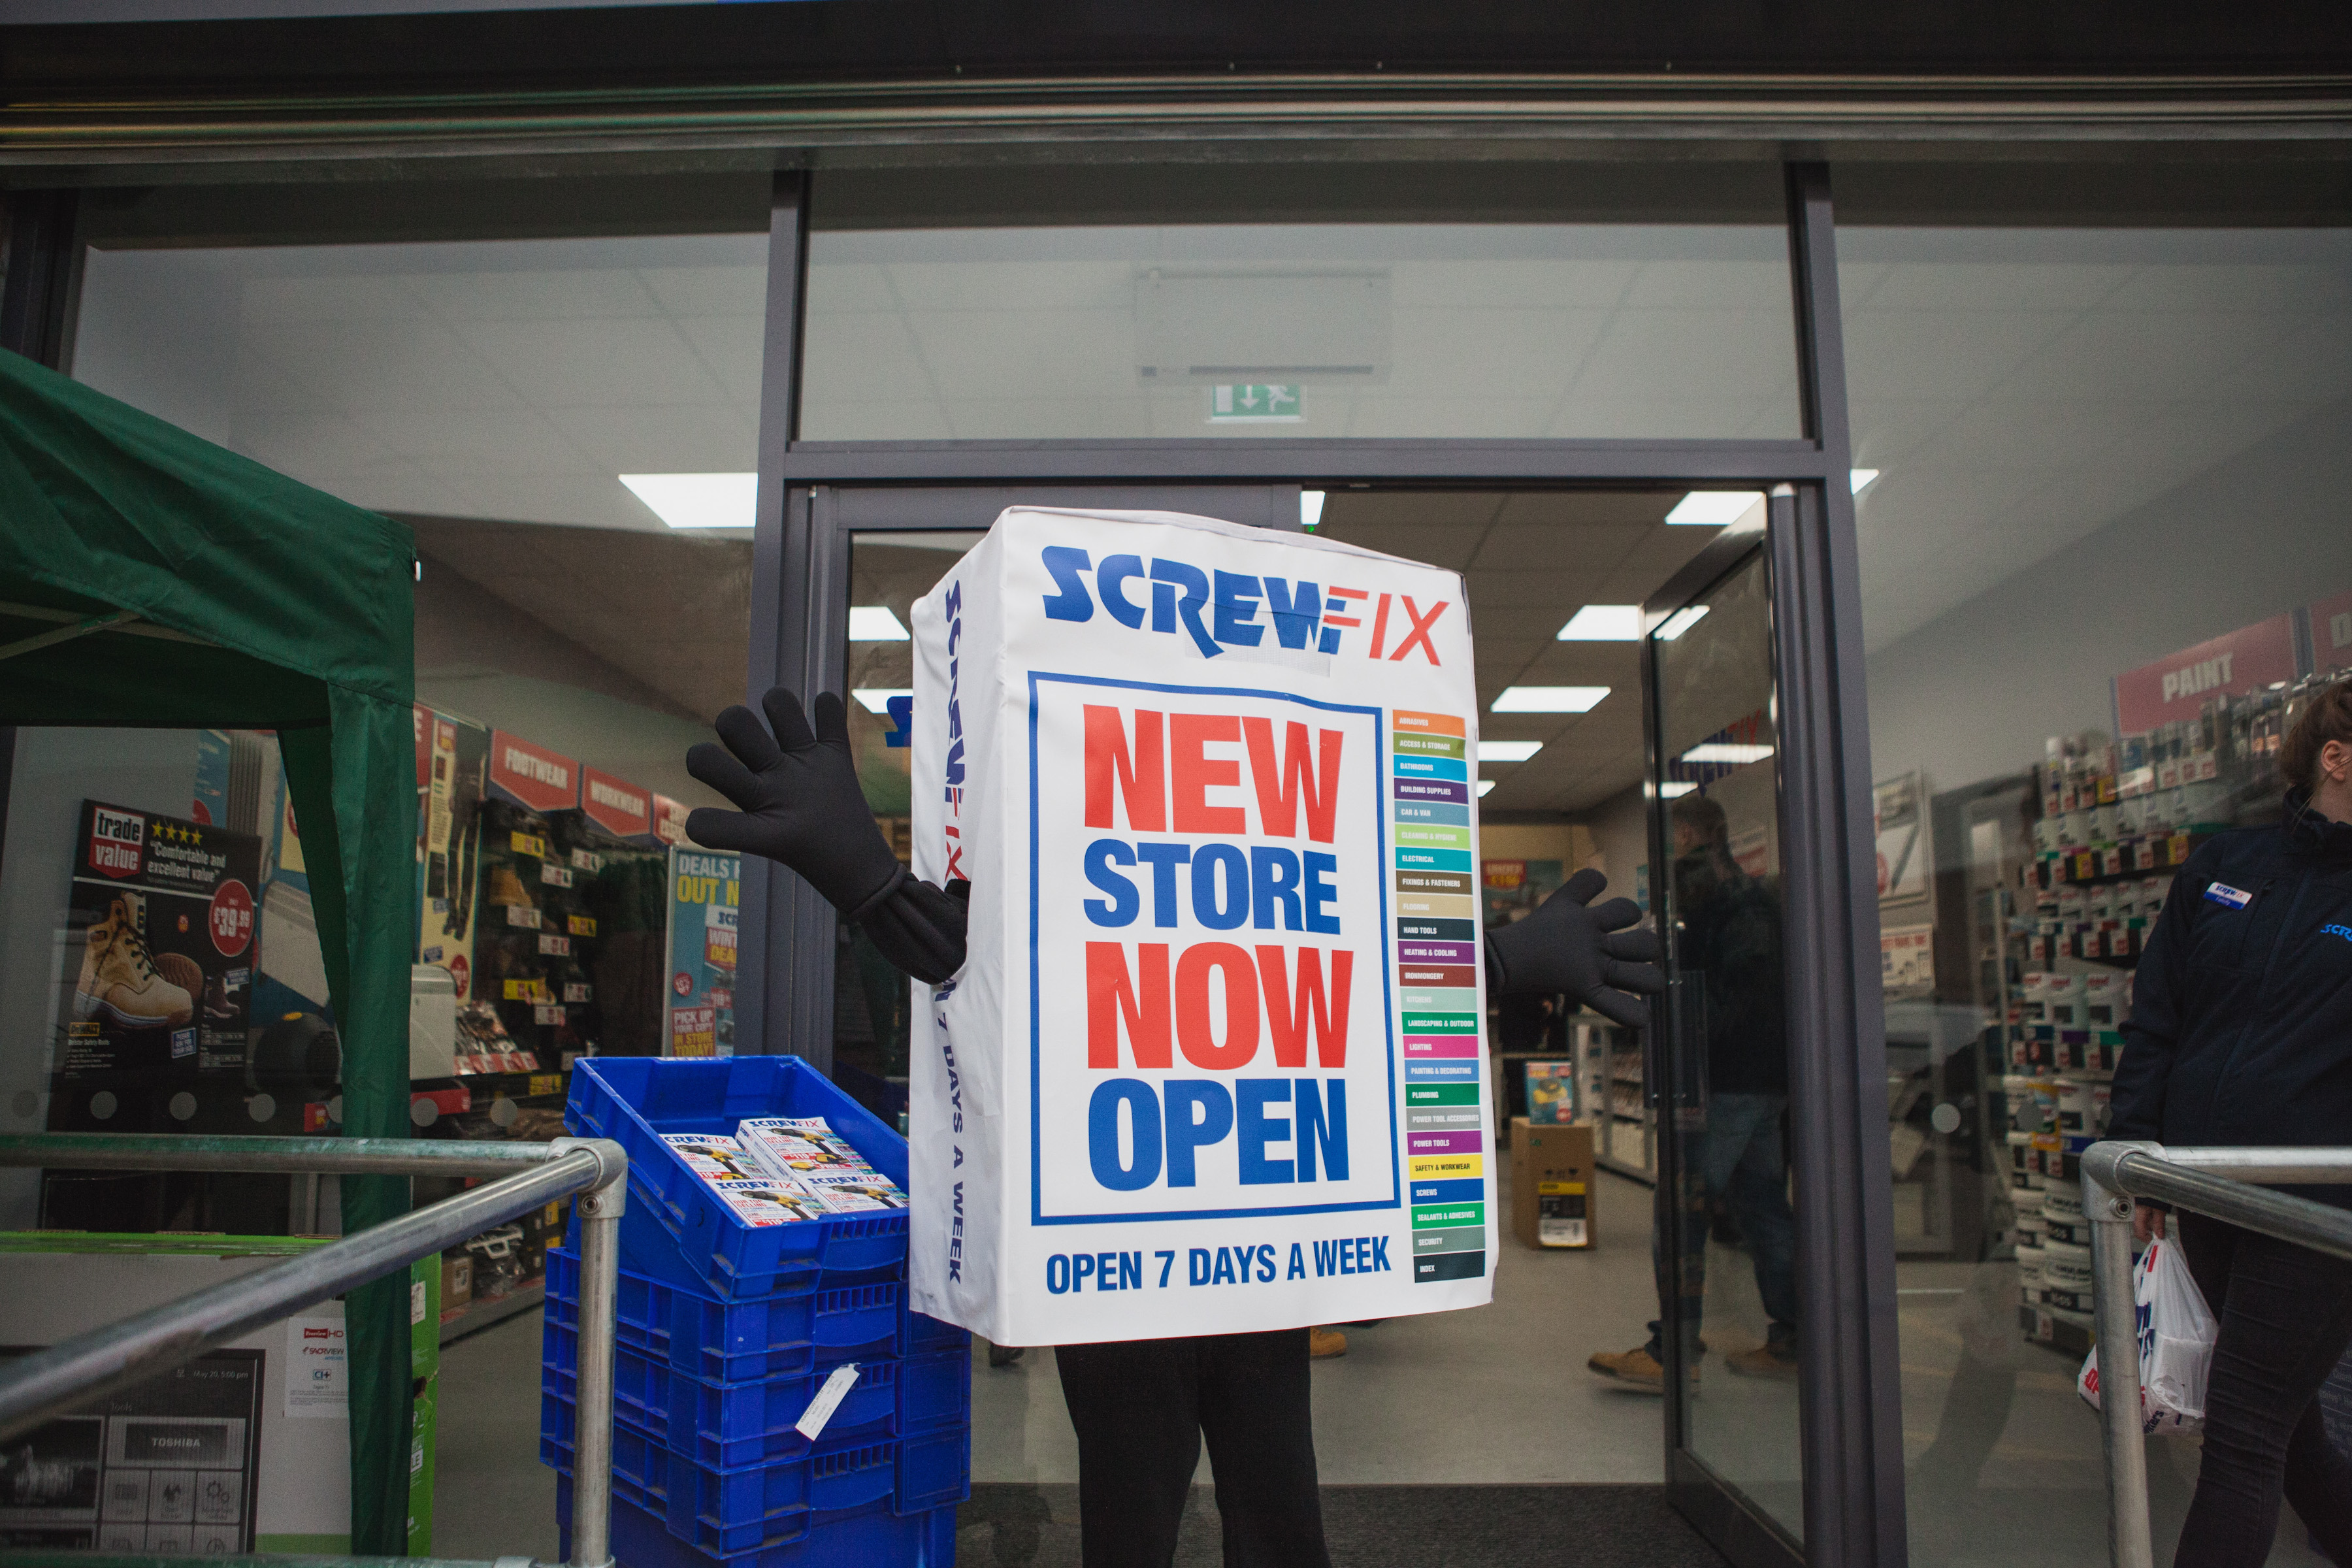 Wandsworth’s first Screwfix store is declared a runaway success